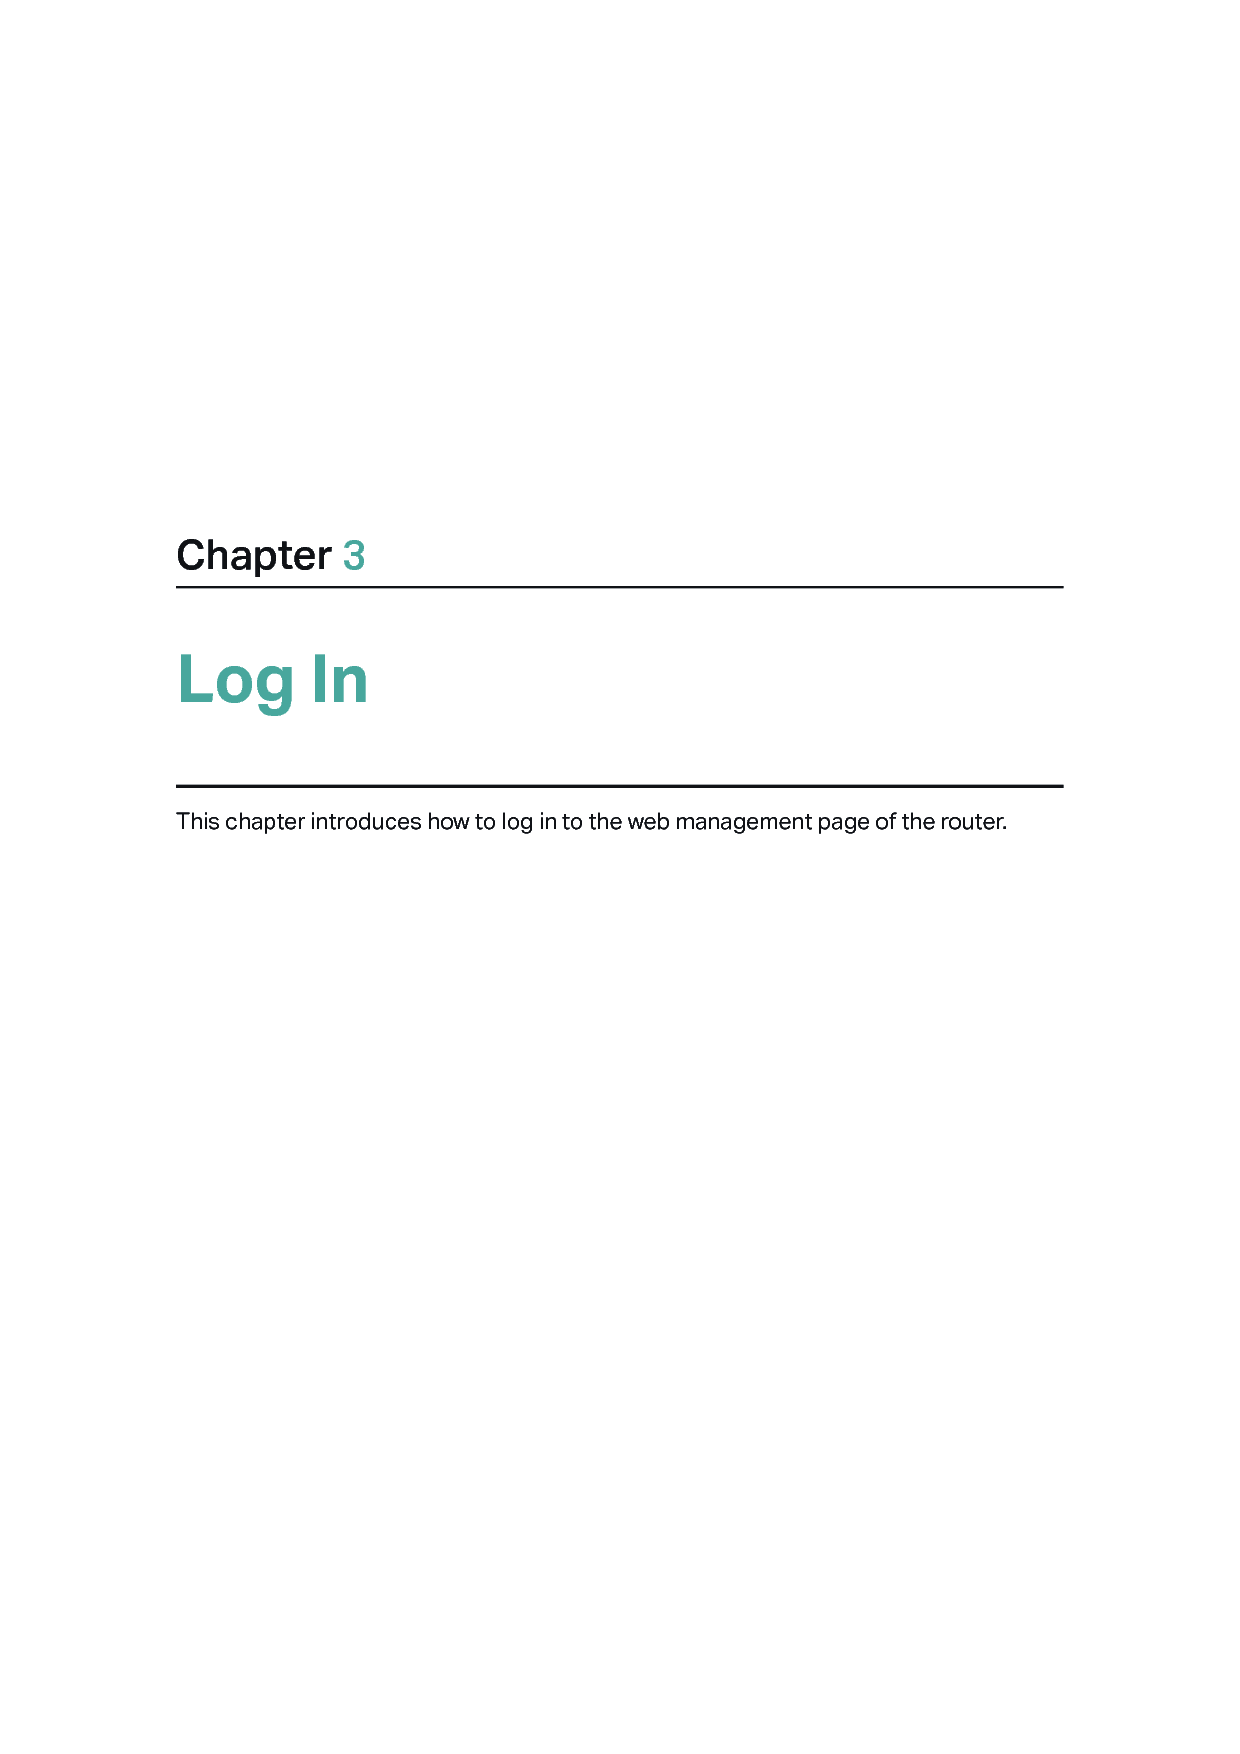 Chapter 3Log InThis chapter introduces how to log in to the web management page of the router.  